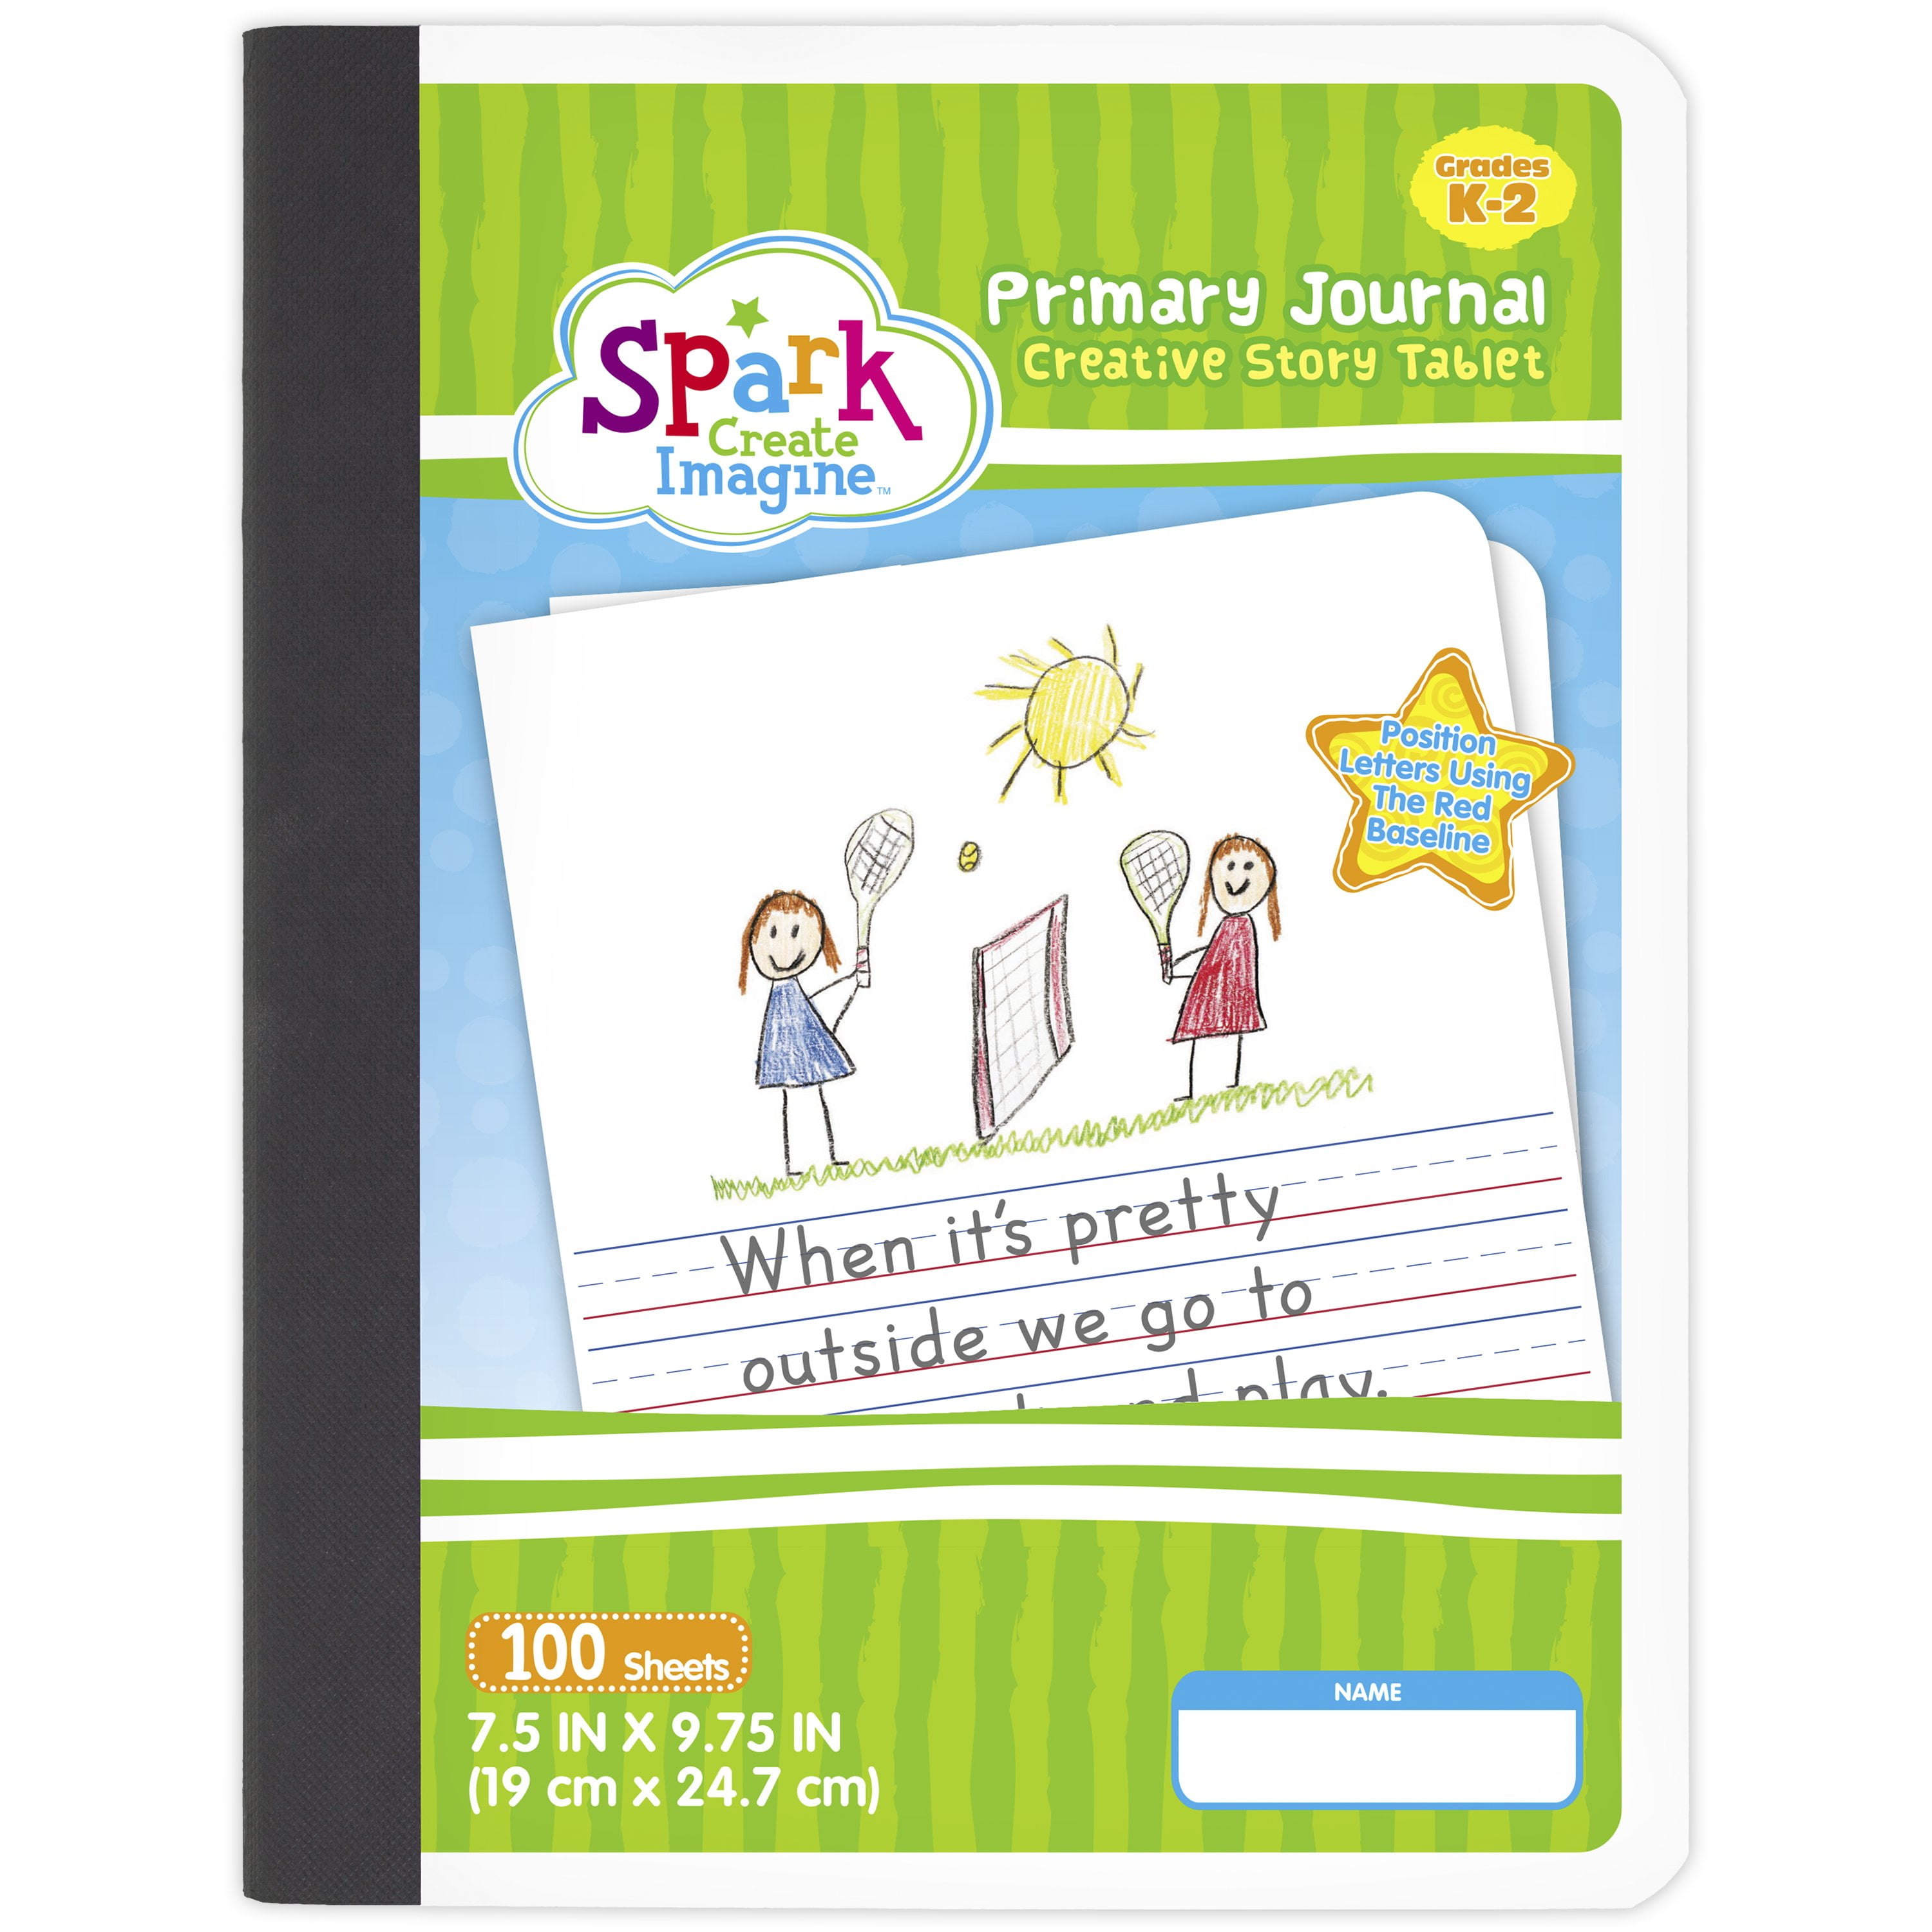 Spark Half Page Ruled Primary Journal, Grades K-2, 100 Pages (09644)